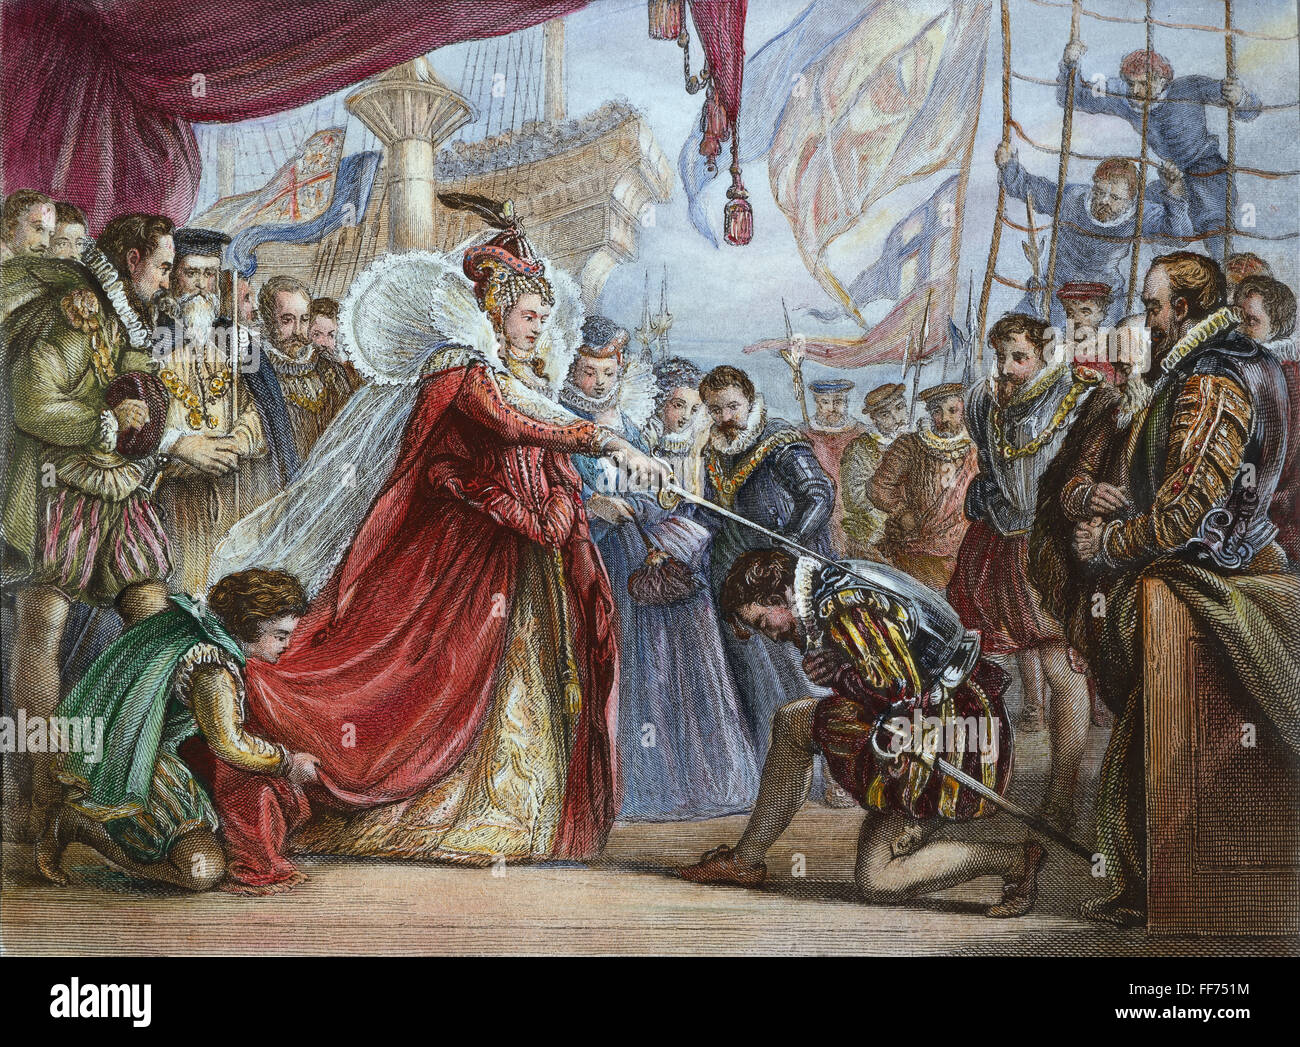 ELIZABETH I/FRANCIS DRAKE. /nQueen Elizabeth I knighting Francis Drake on the deck of the 'Golden Hind' in Deptford in April 1581: colored engraving, 19th century. Stock Photo